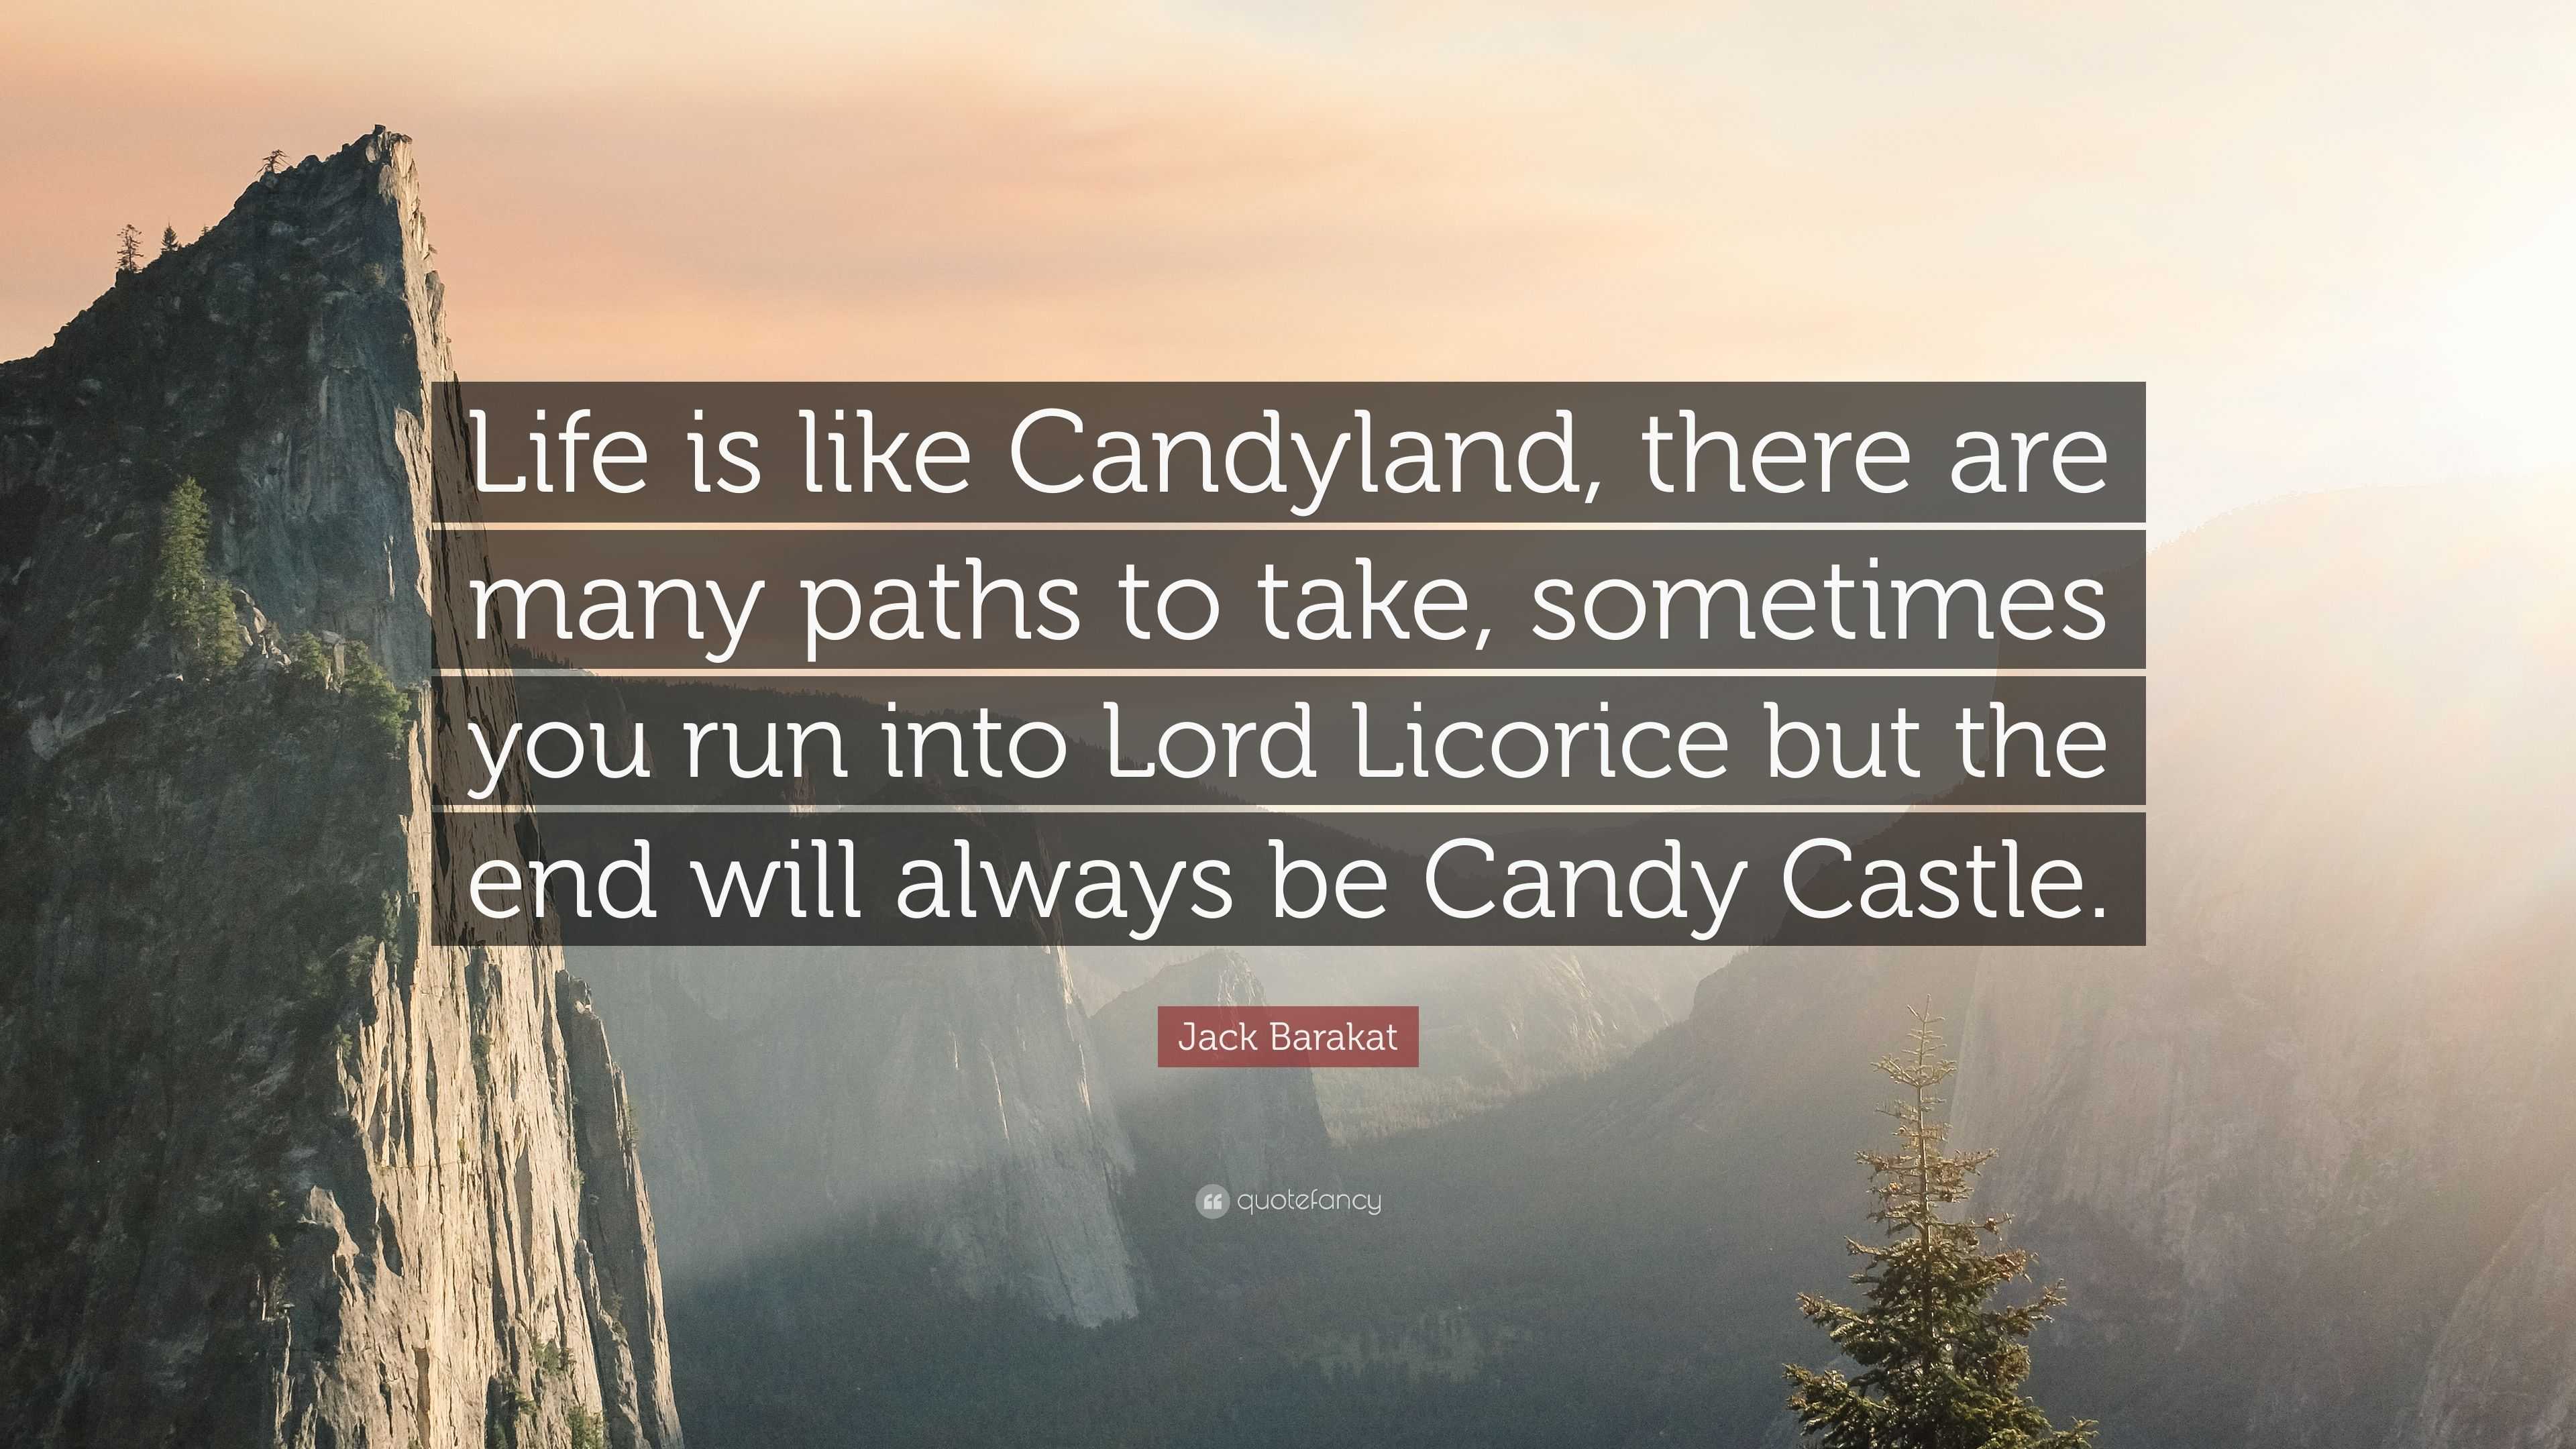 Jack Barakat Quote: "Life is like Candyland, there are many paths to take, sometimes you run ...